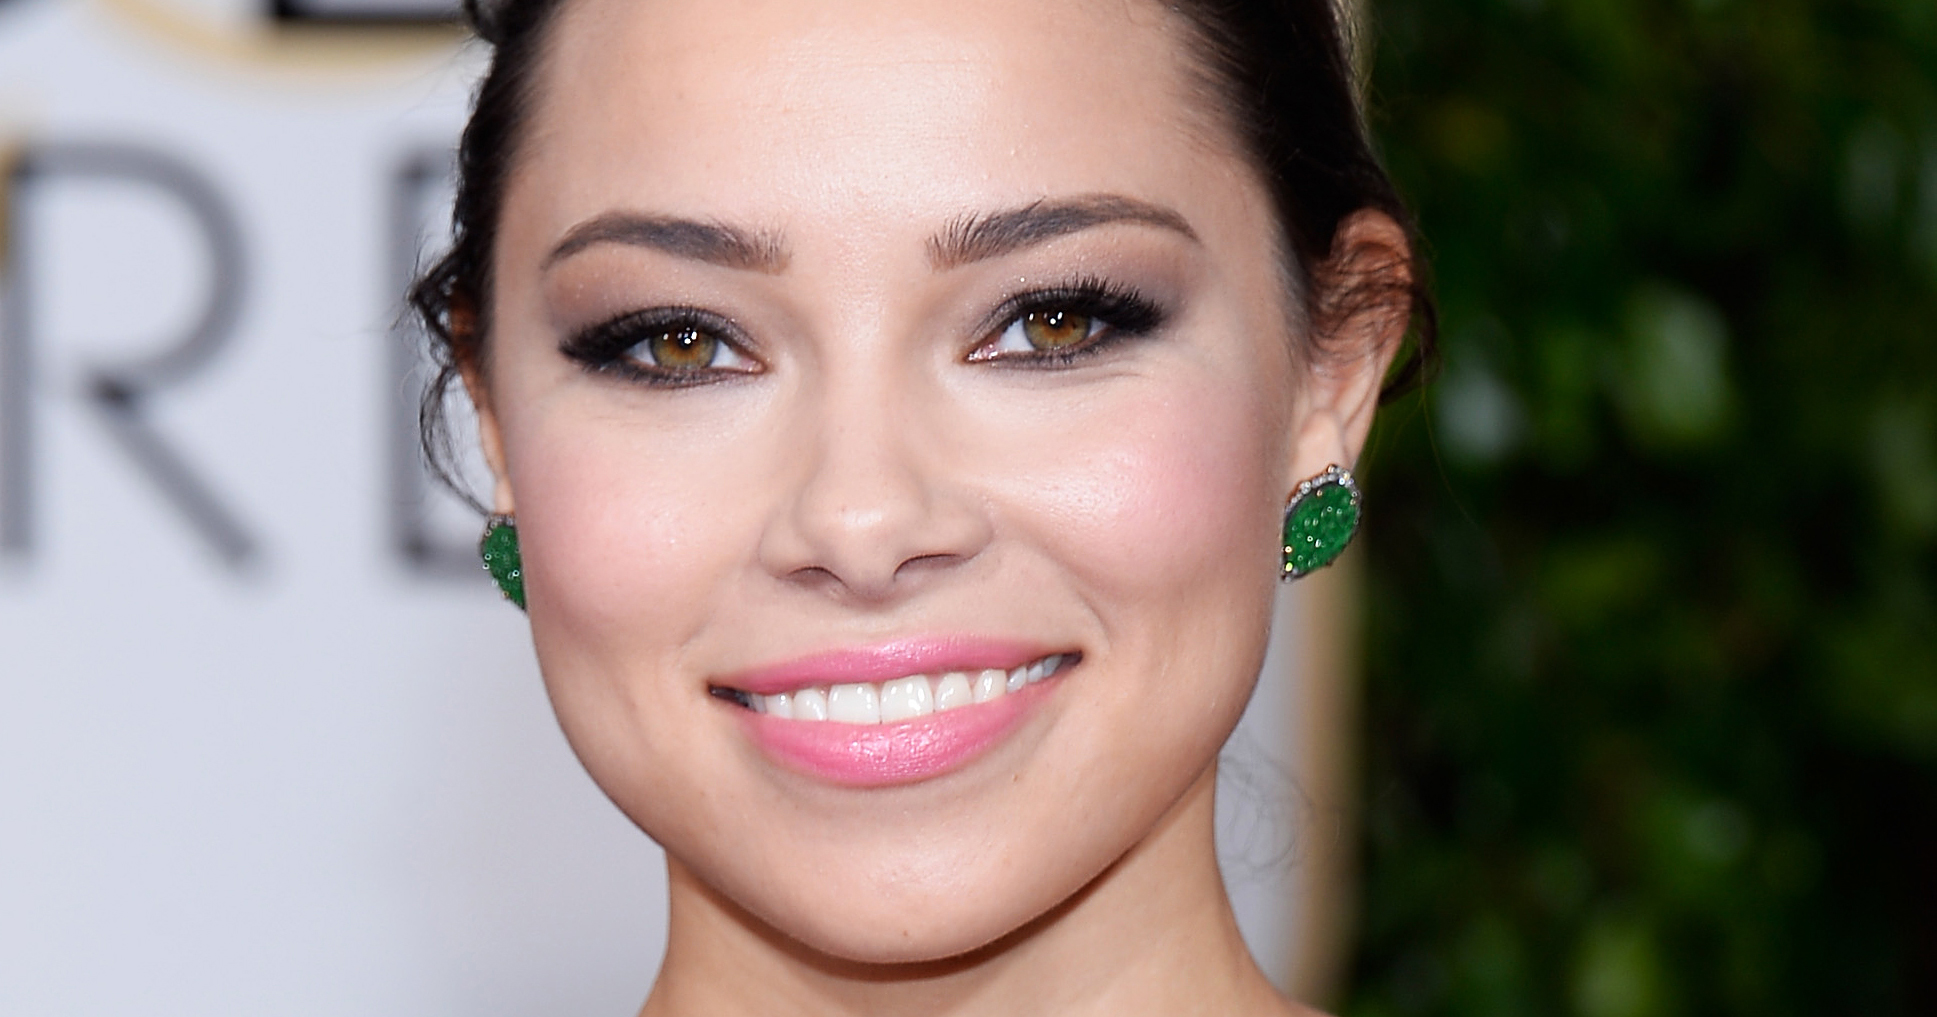 All About Jessica Parker Kennedy: Height, Weight, Bio, and More